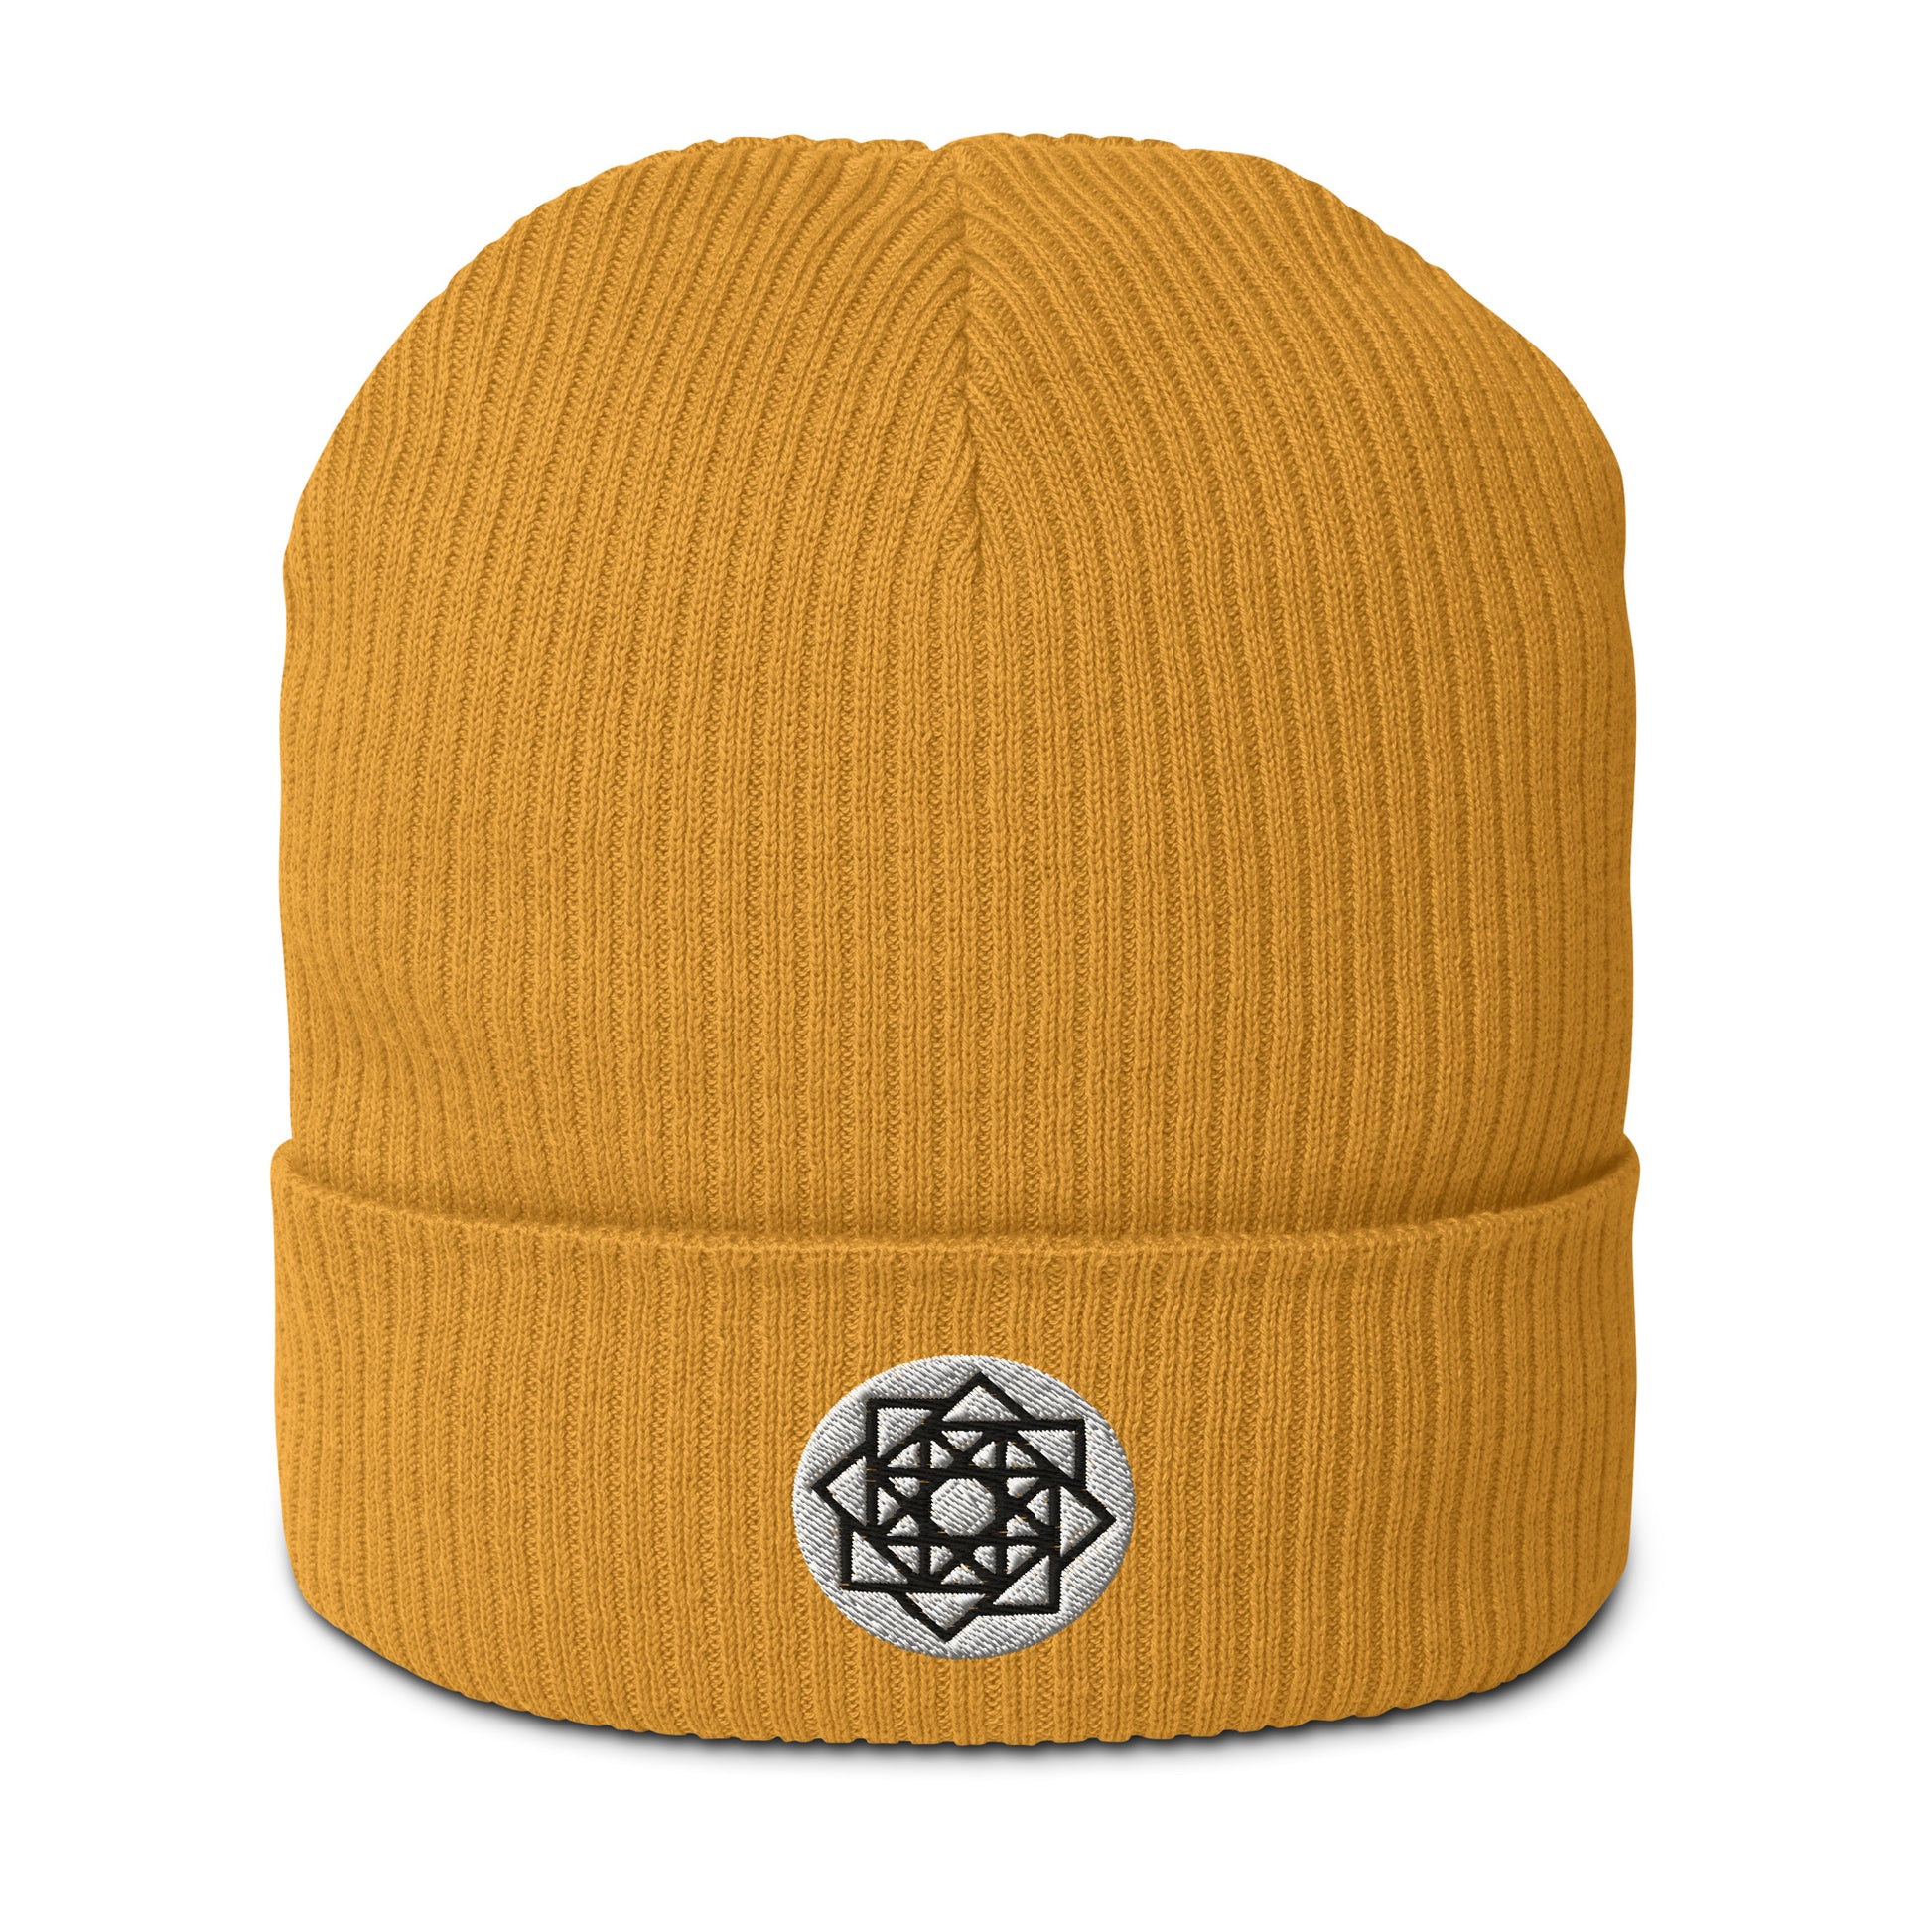 Allow me to introduce our Square Matrix Beanie in Mustard Yellow, a testament to cosmic order and mathematical elegance. Woven from the finest organic cotton and adorned with the precise geometry of the Square Matrix symbol, this beanie transcends mere headwear.